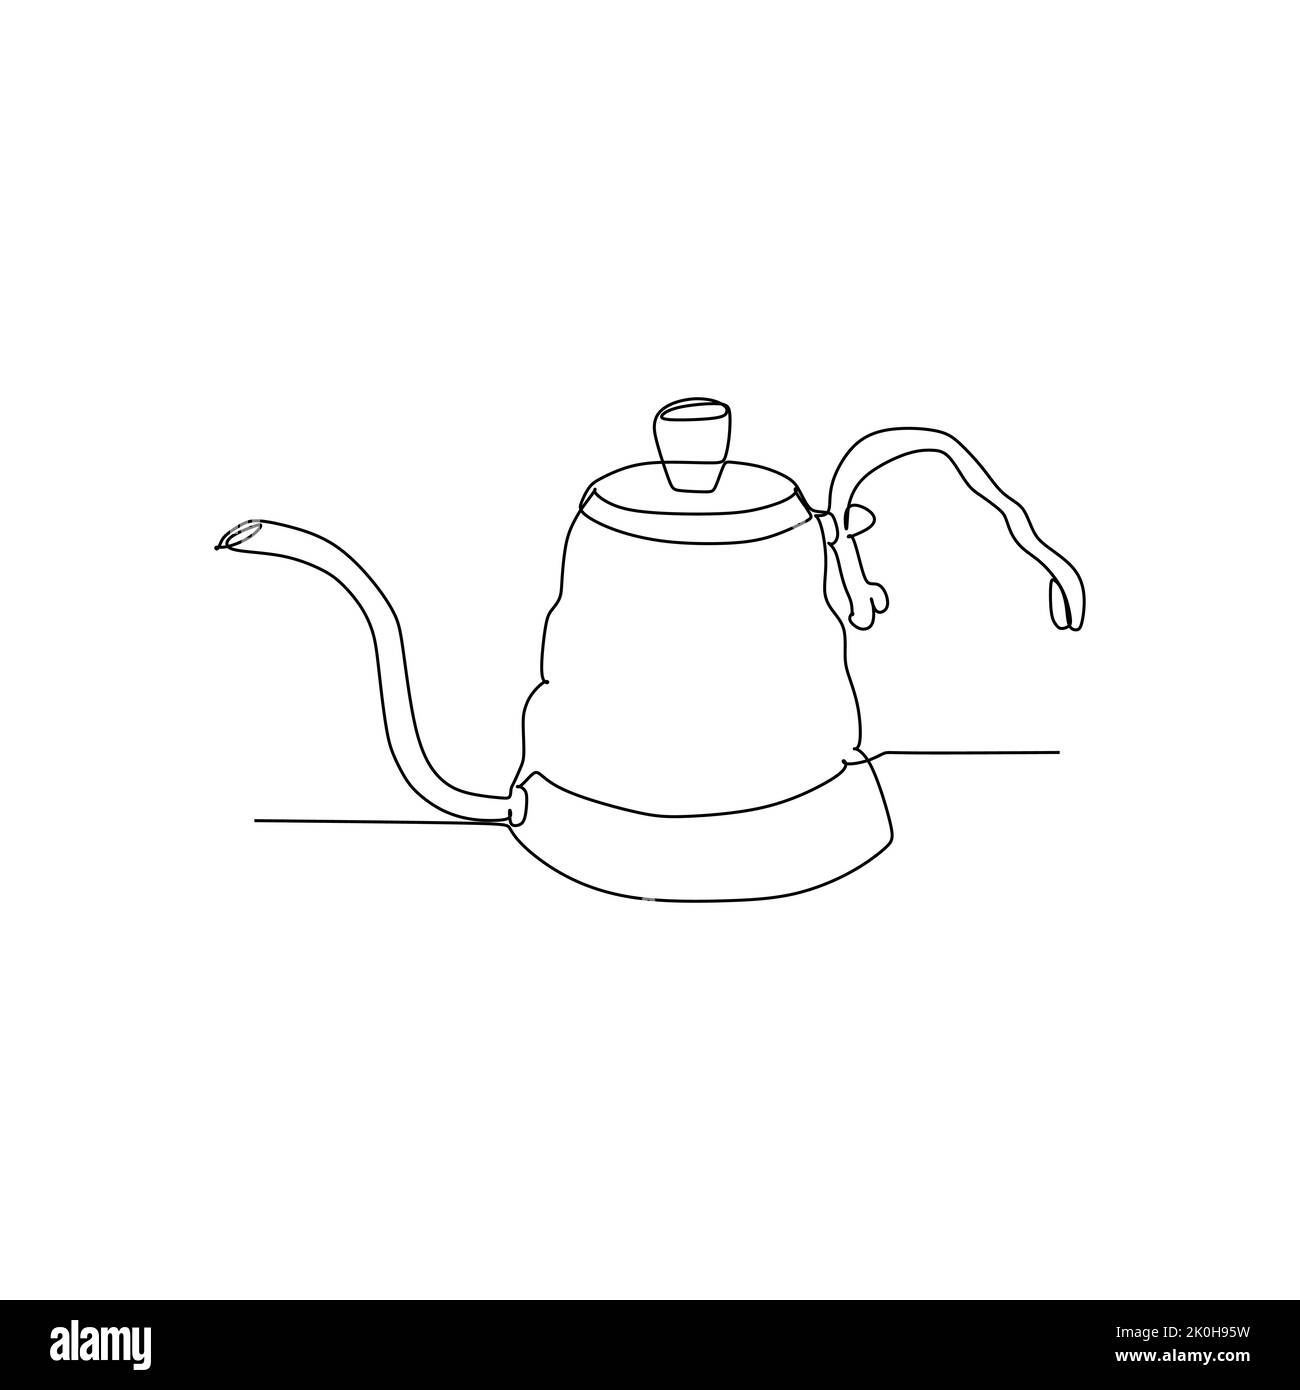 V60 Pouring gooseneck stovetop Kettle - Continuous one line drawing vector illustration hand drawn style design for food and beverages concept Stock Vector